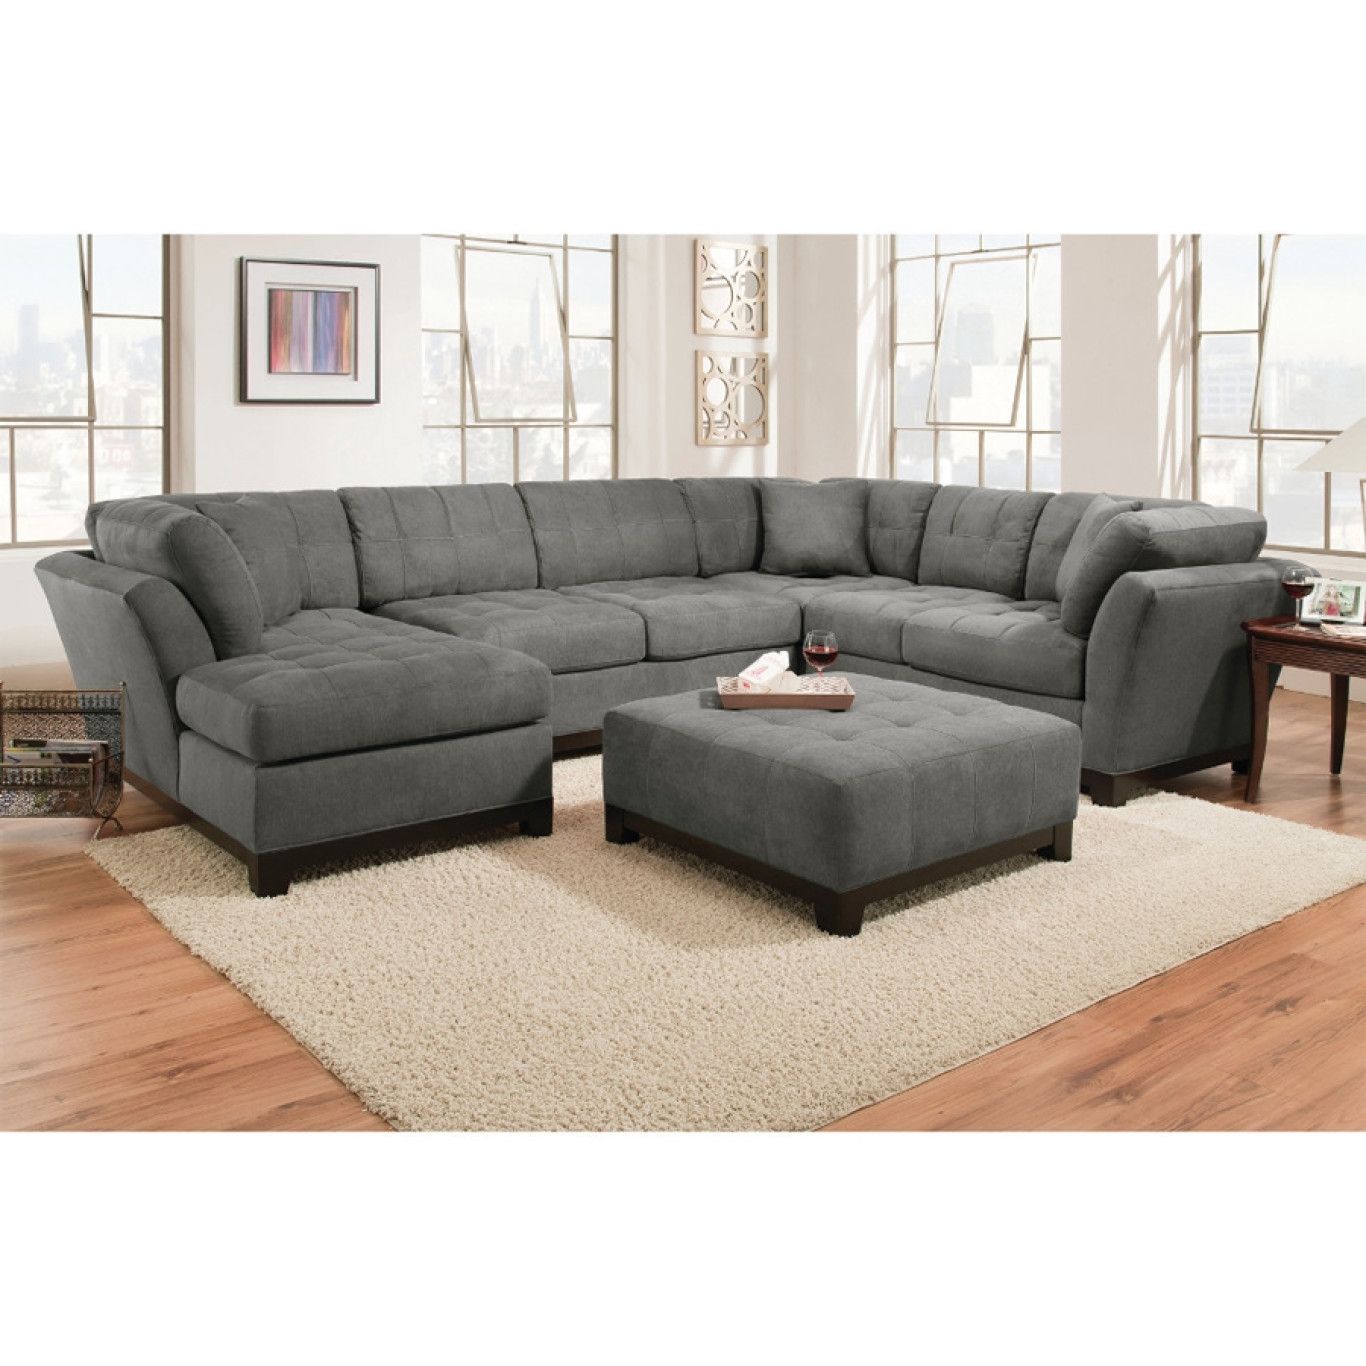 Bassett Furniture Greensboro Nc With Greensboro Nc Sectional Sofas (View 2 of 10)